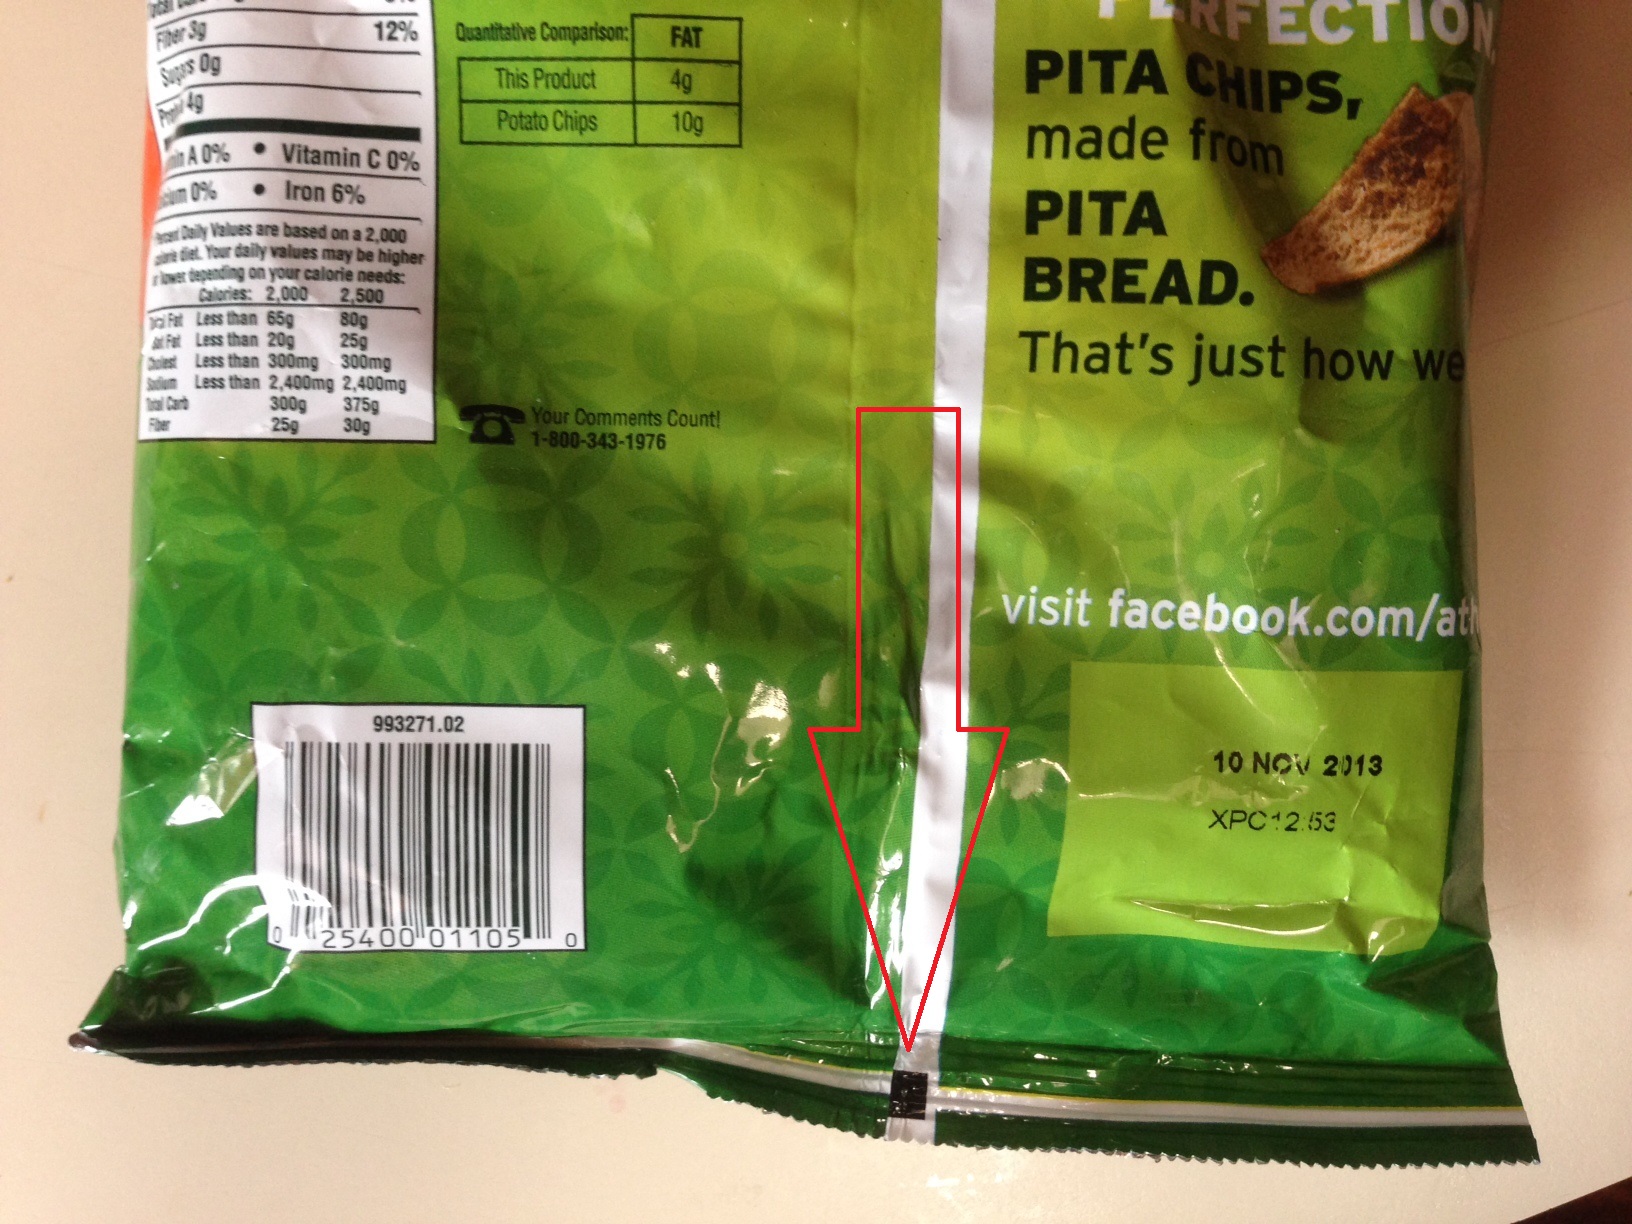 A potato crisp pack also has markings for its packaging.